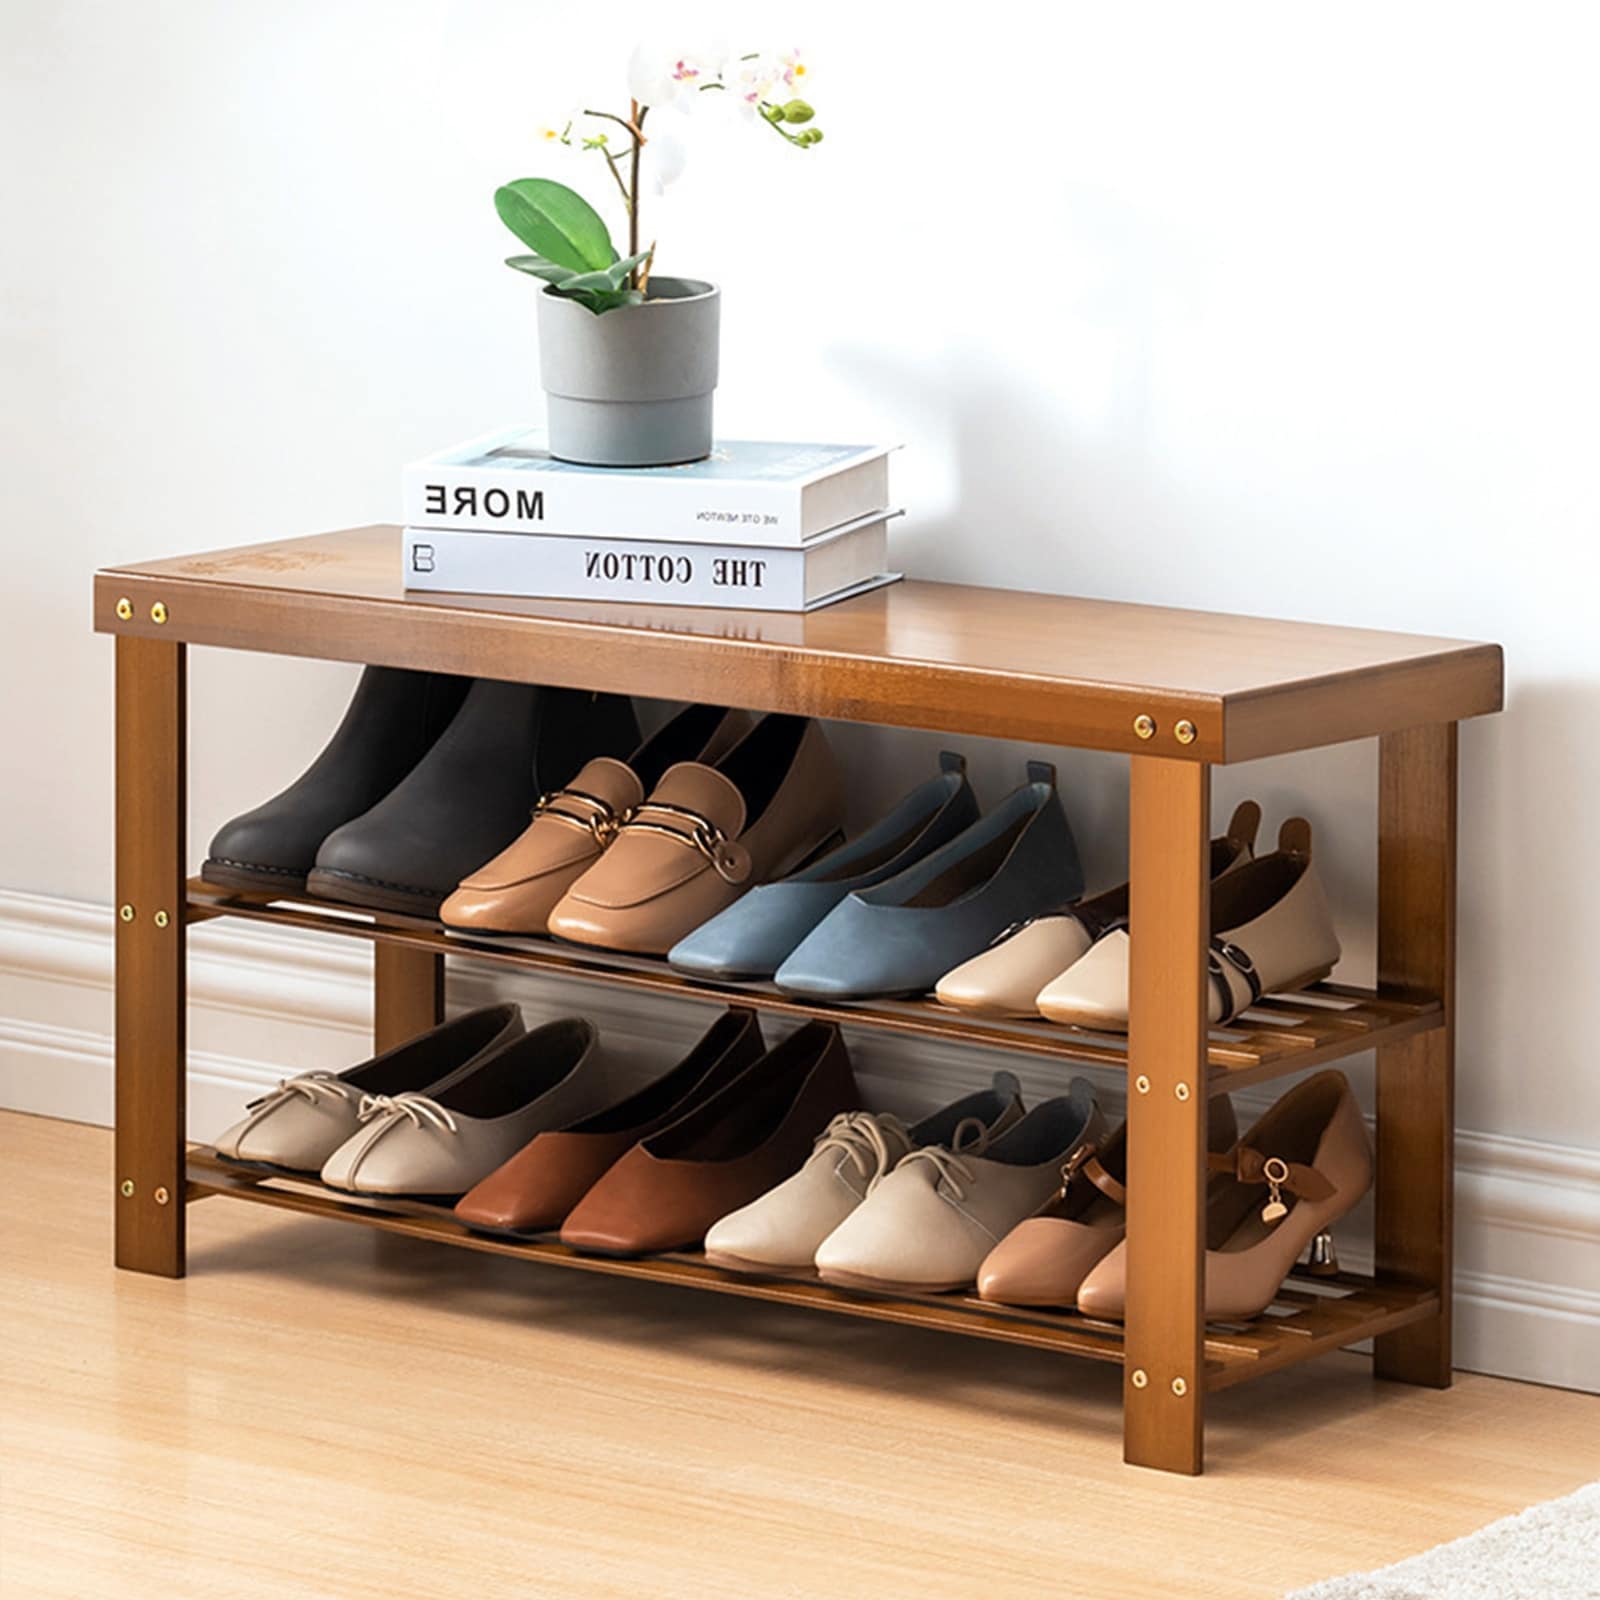 Shoe Bench, 3-Tier Shoe Rack, Storage Entry Bench for Hallway